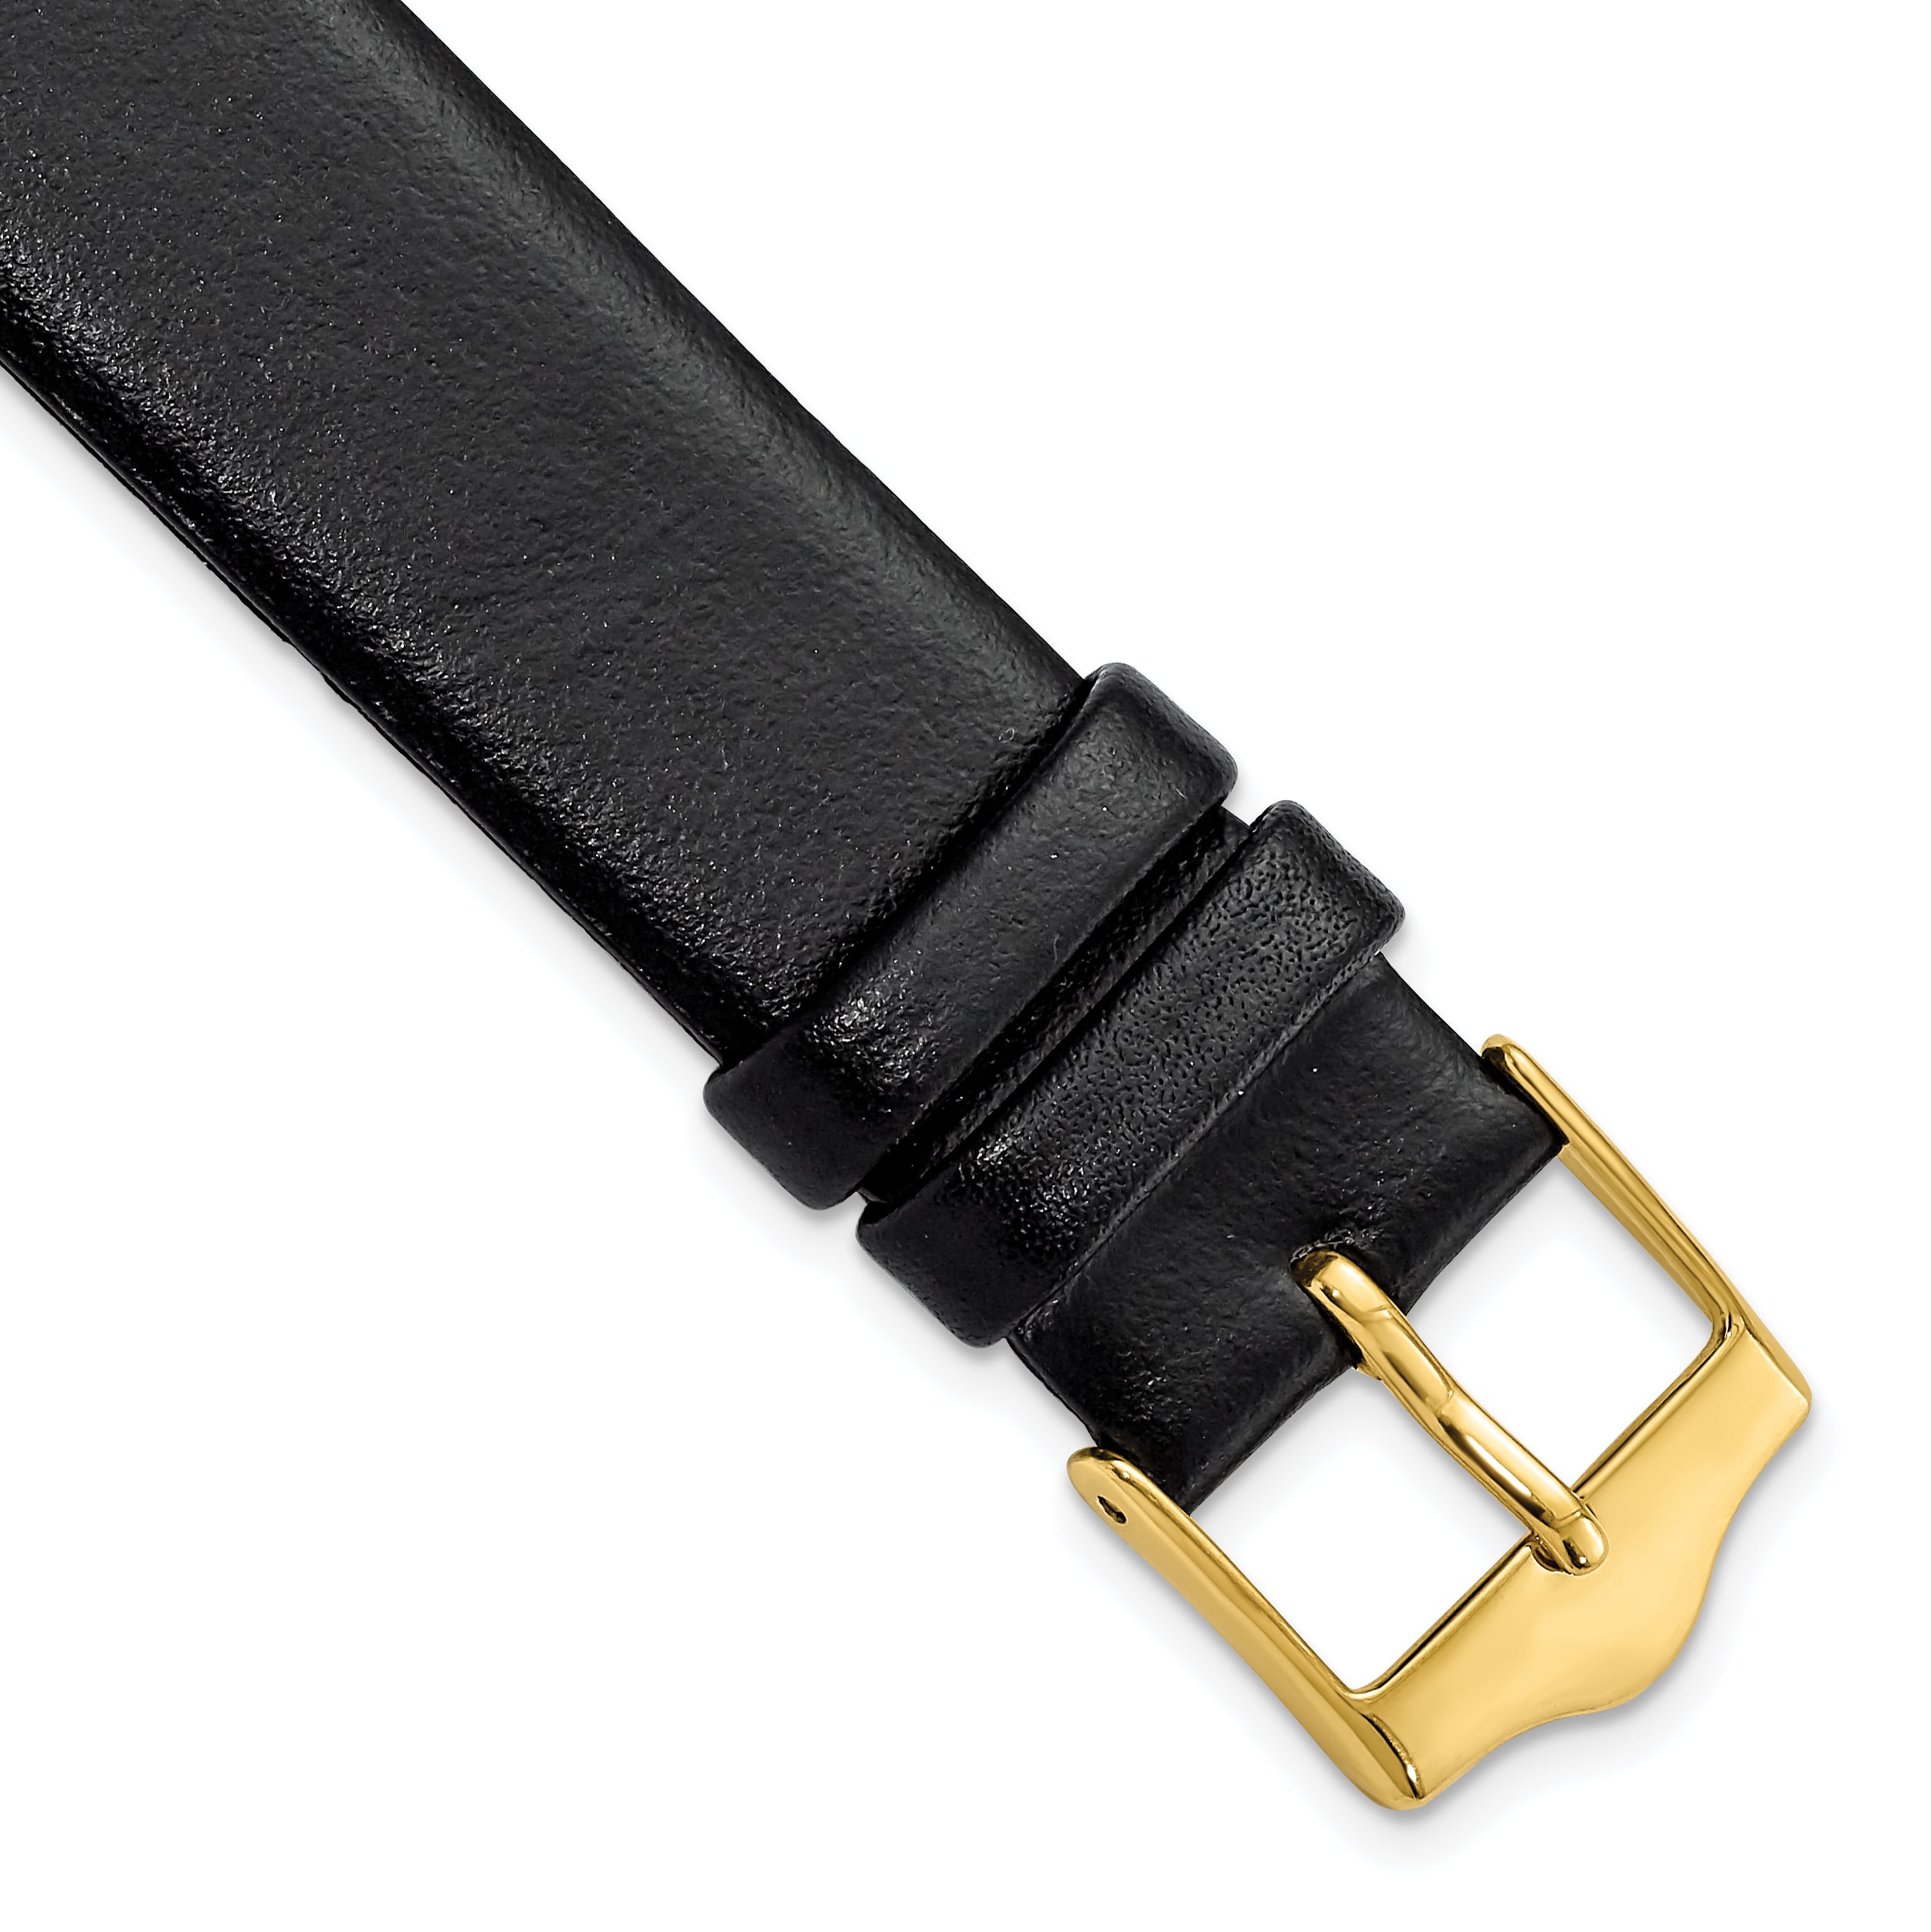 DeBeer 17mm Black Smooth Flat Leather with Gold-tone Buckle 7.5 inch Watch Band